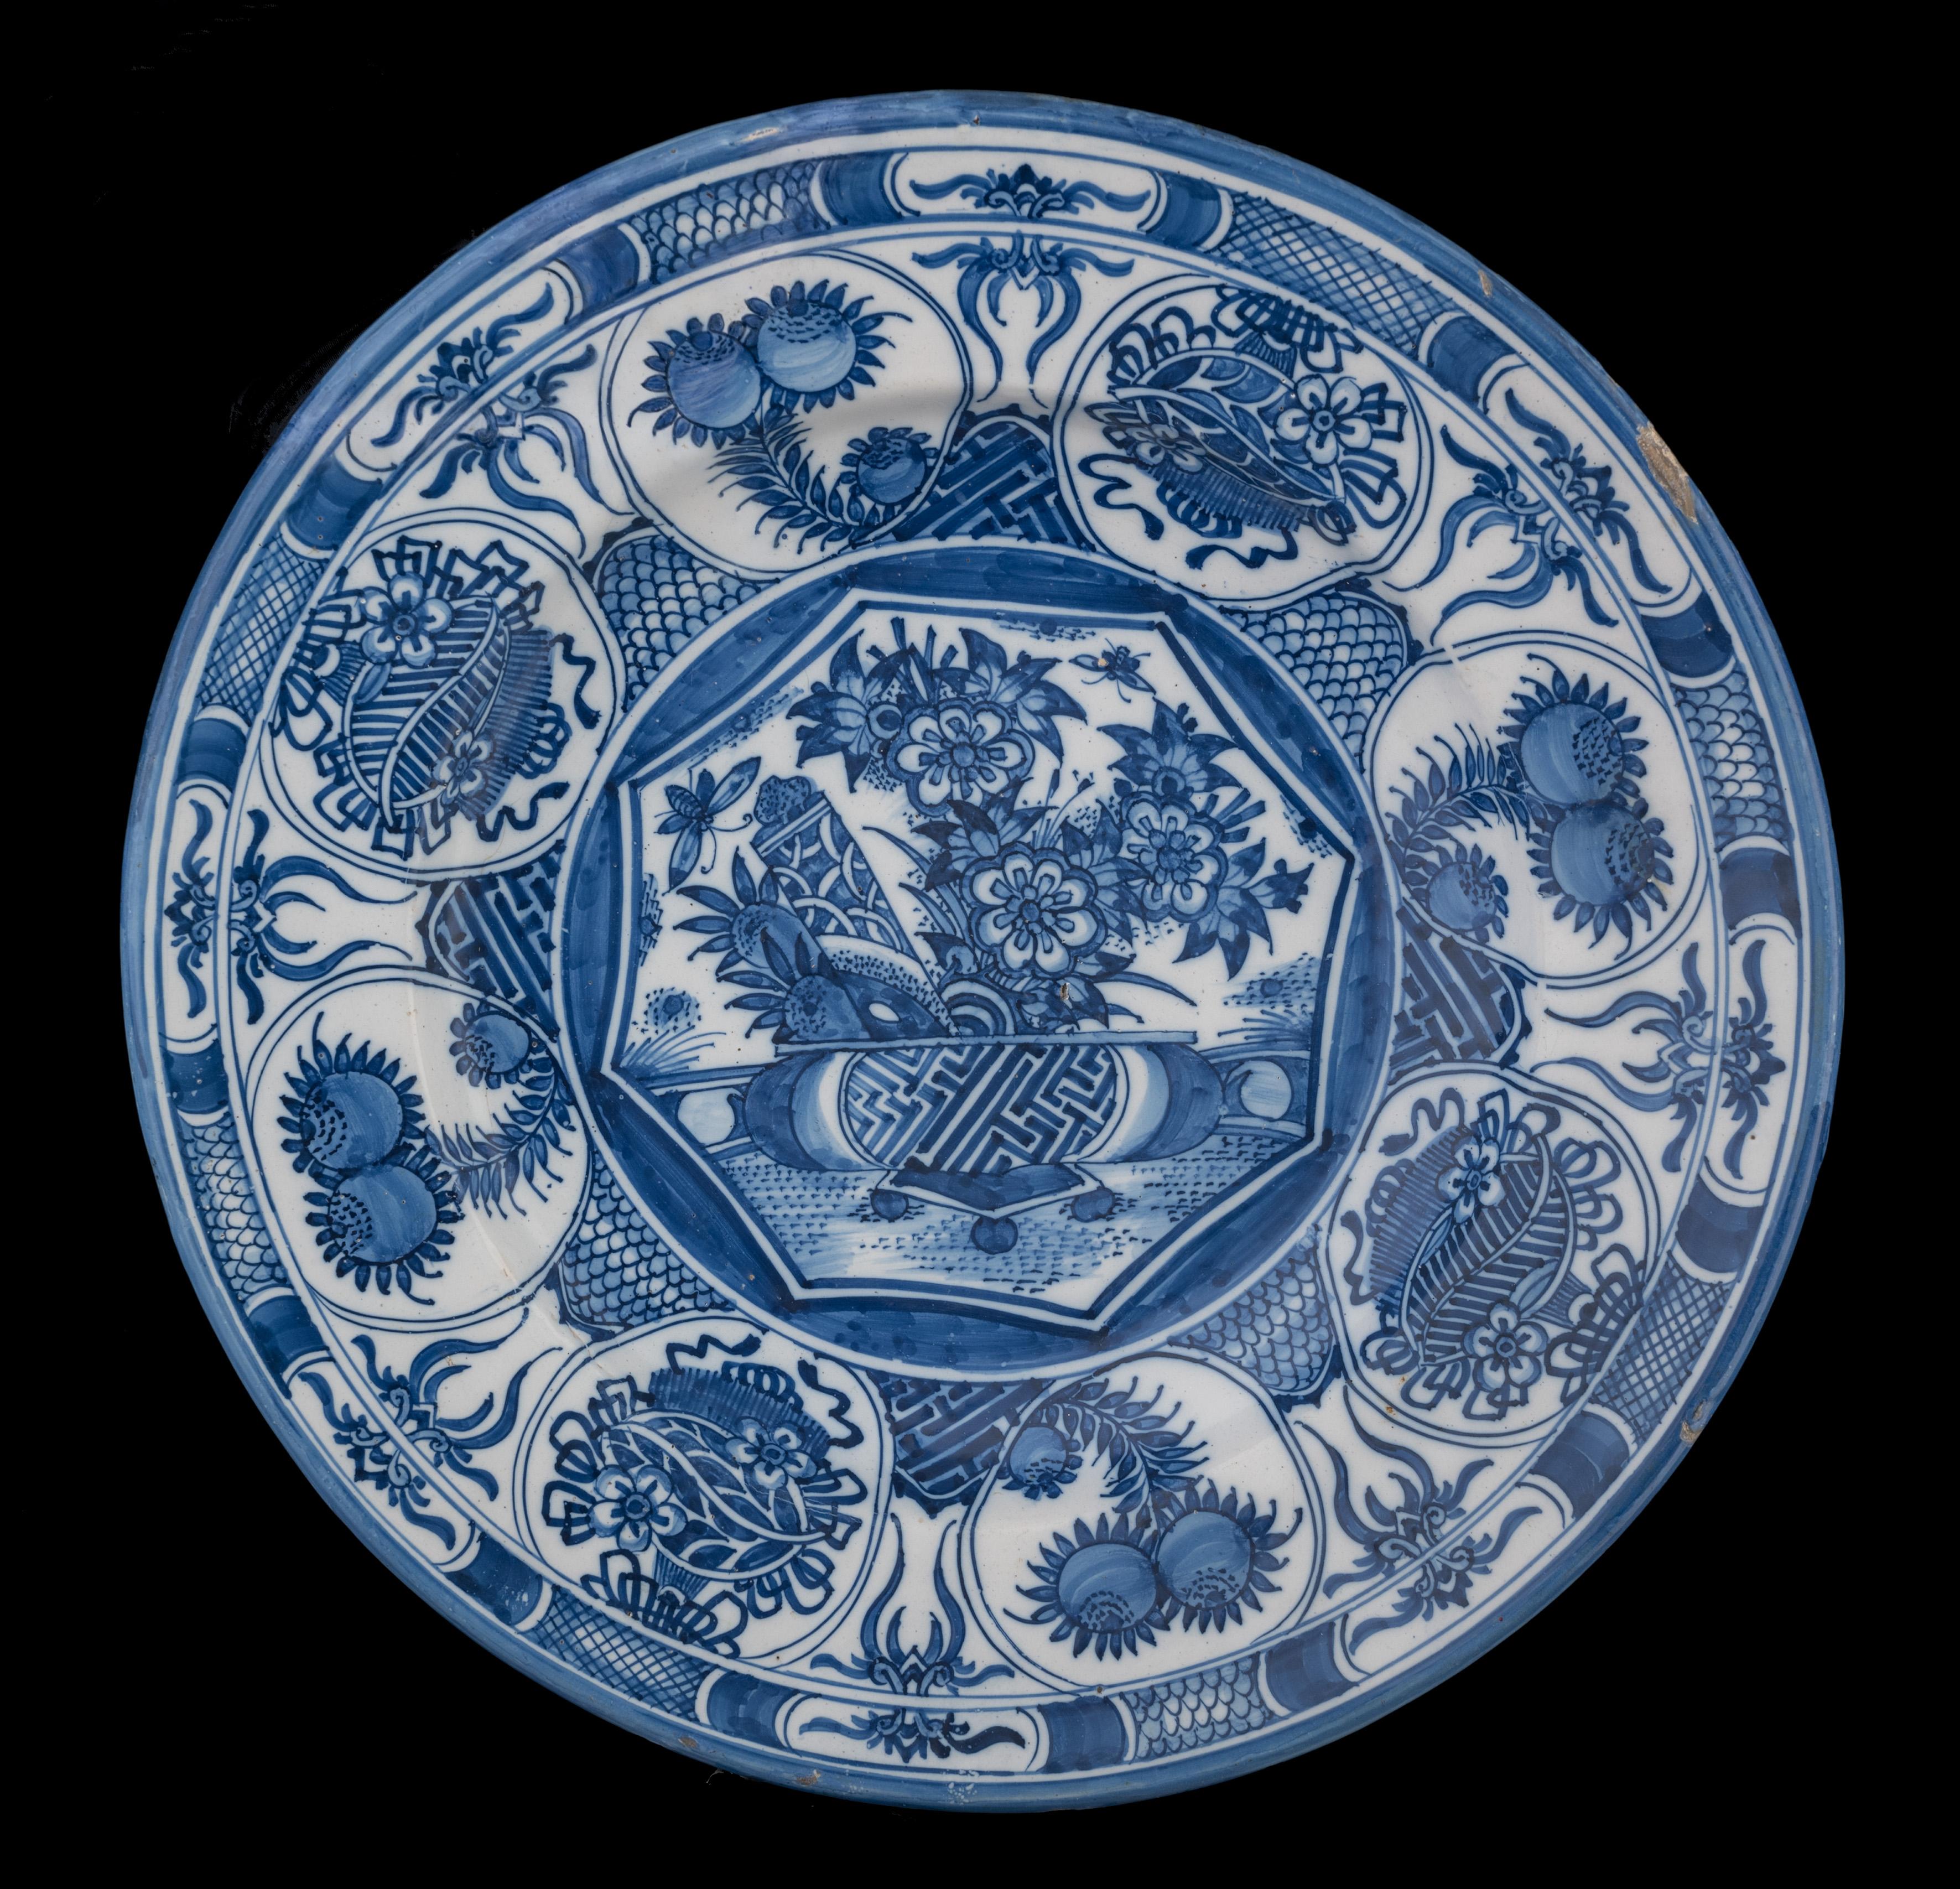 The blue and white dish has a wide-spreading flange. The centre is painted with a basket on a low square table, filled with flowers, fruits, a book scroll and insects. It is placed on the ground in front of a balustrade. The basket is decorated with